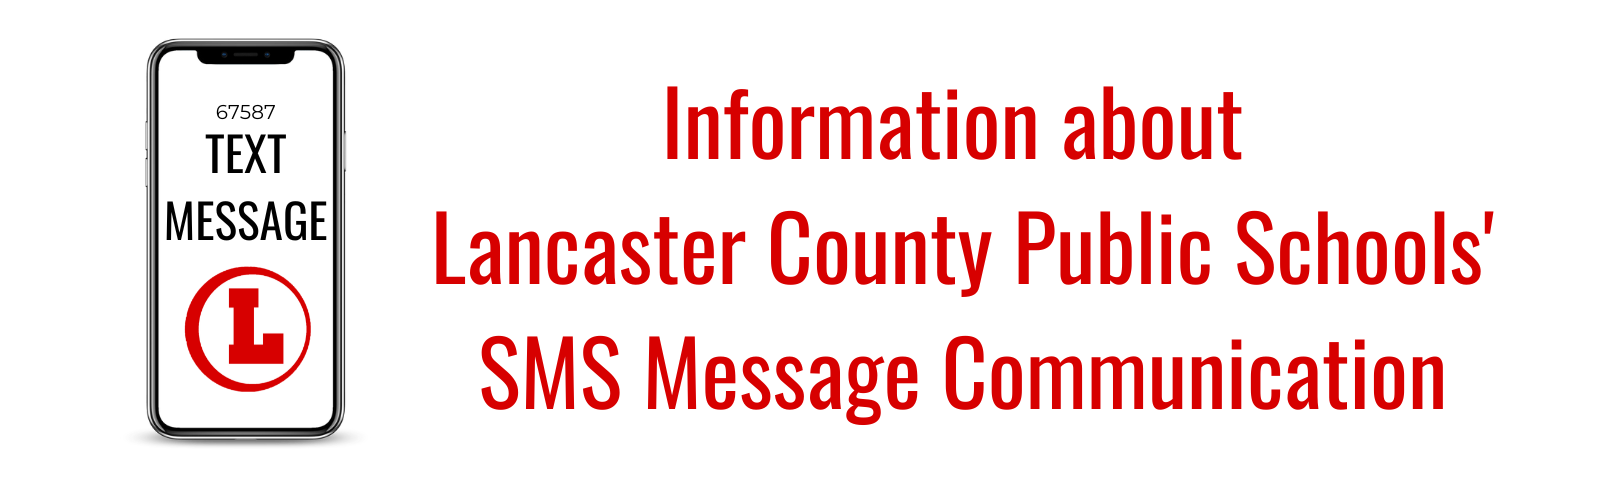 Information about LCPS' SMS Message Communication